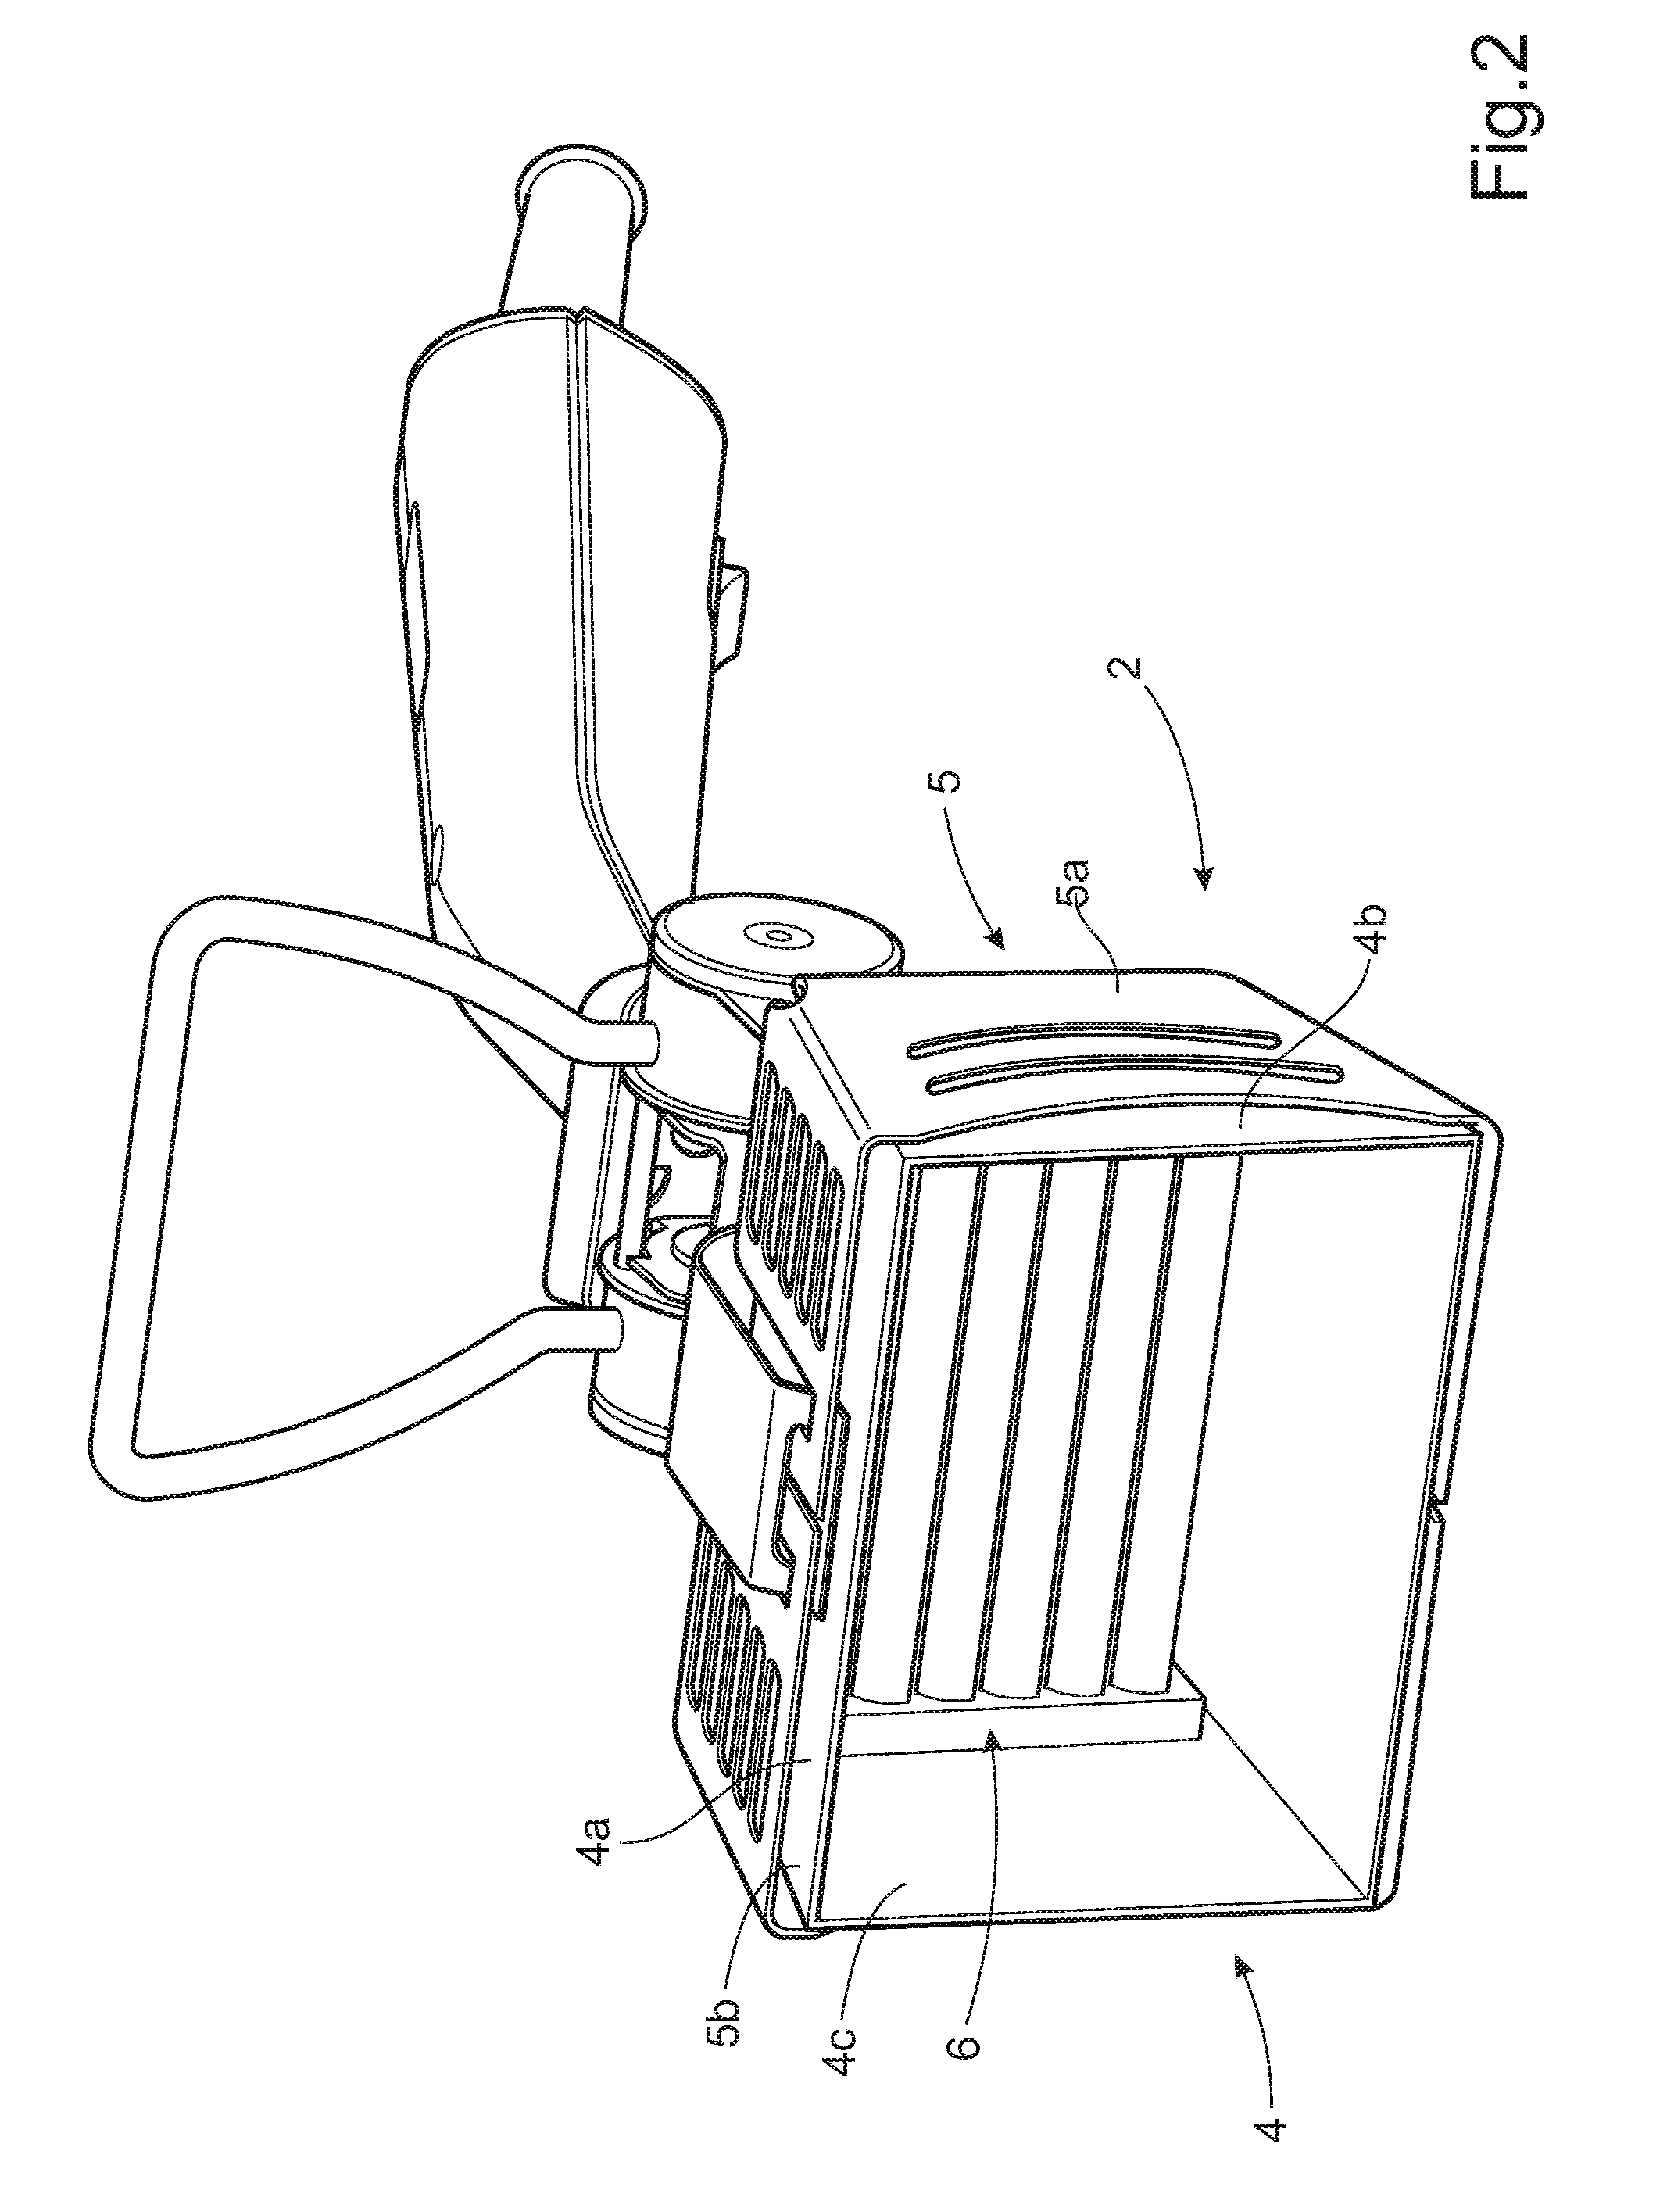 Device for applying heat radiation to a surface